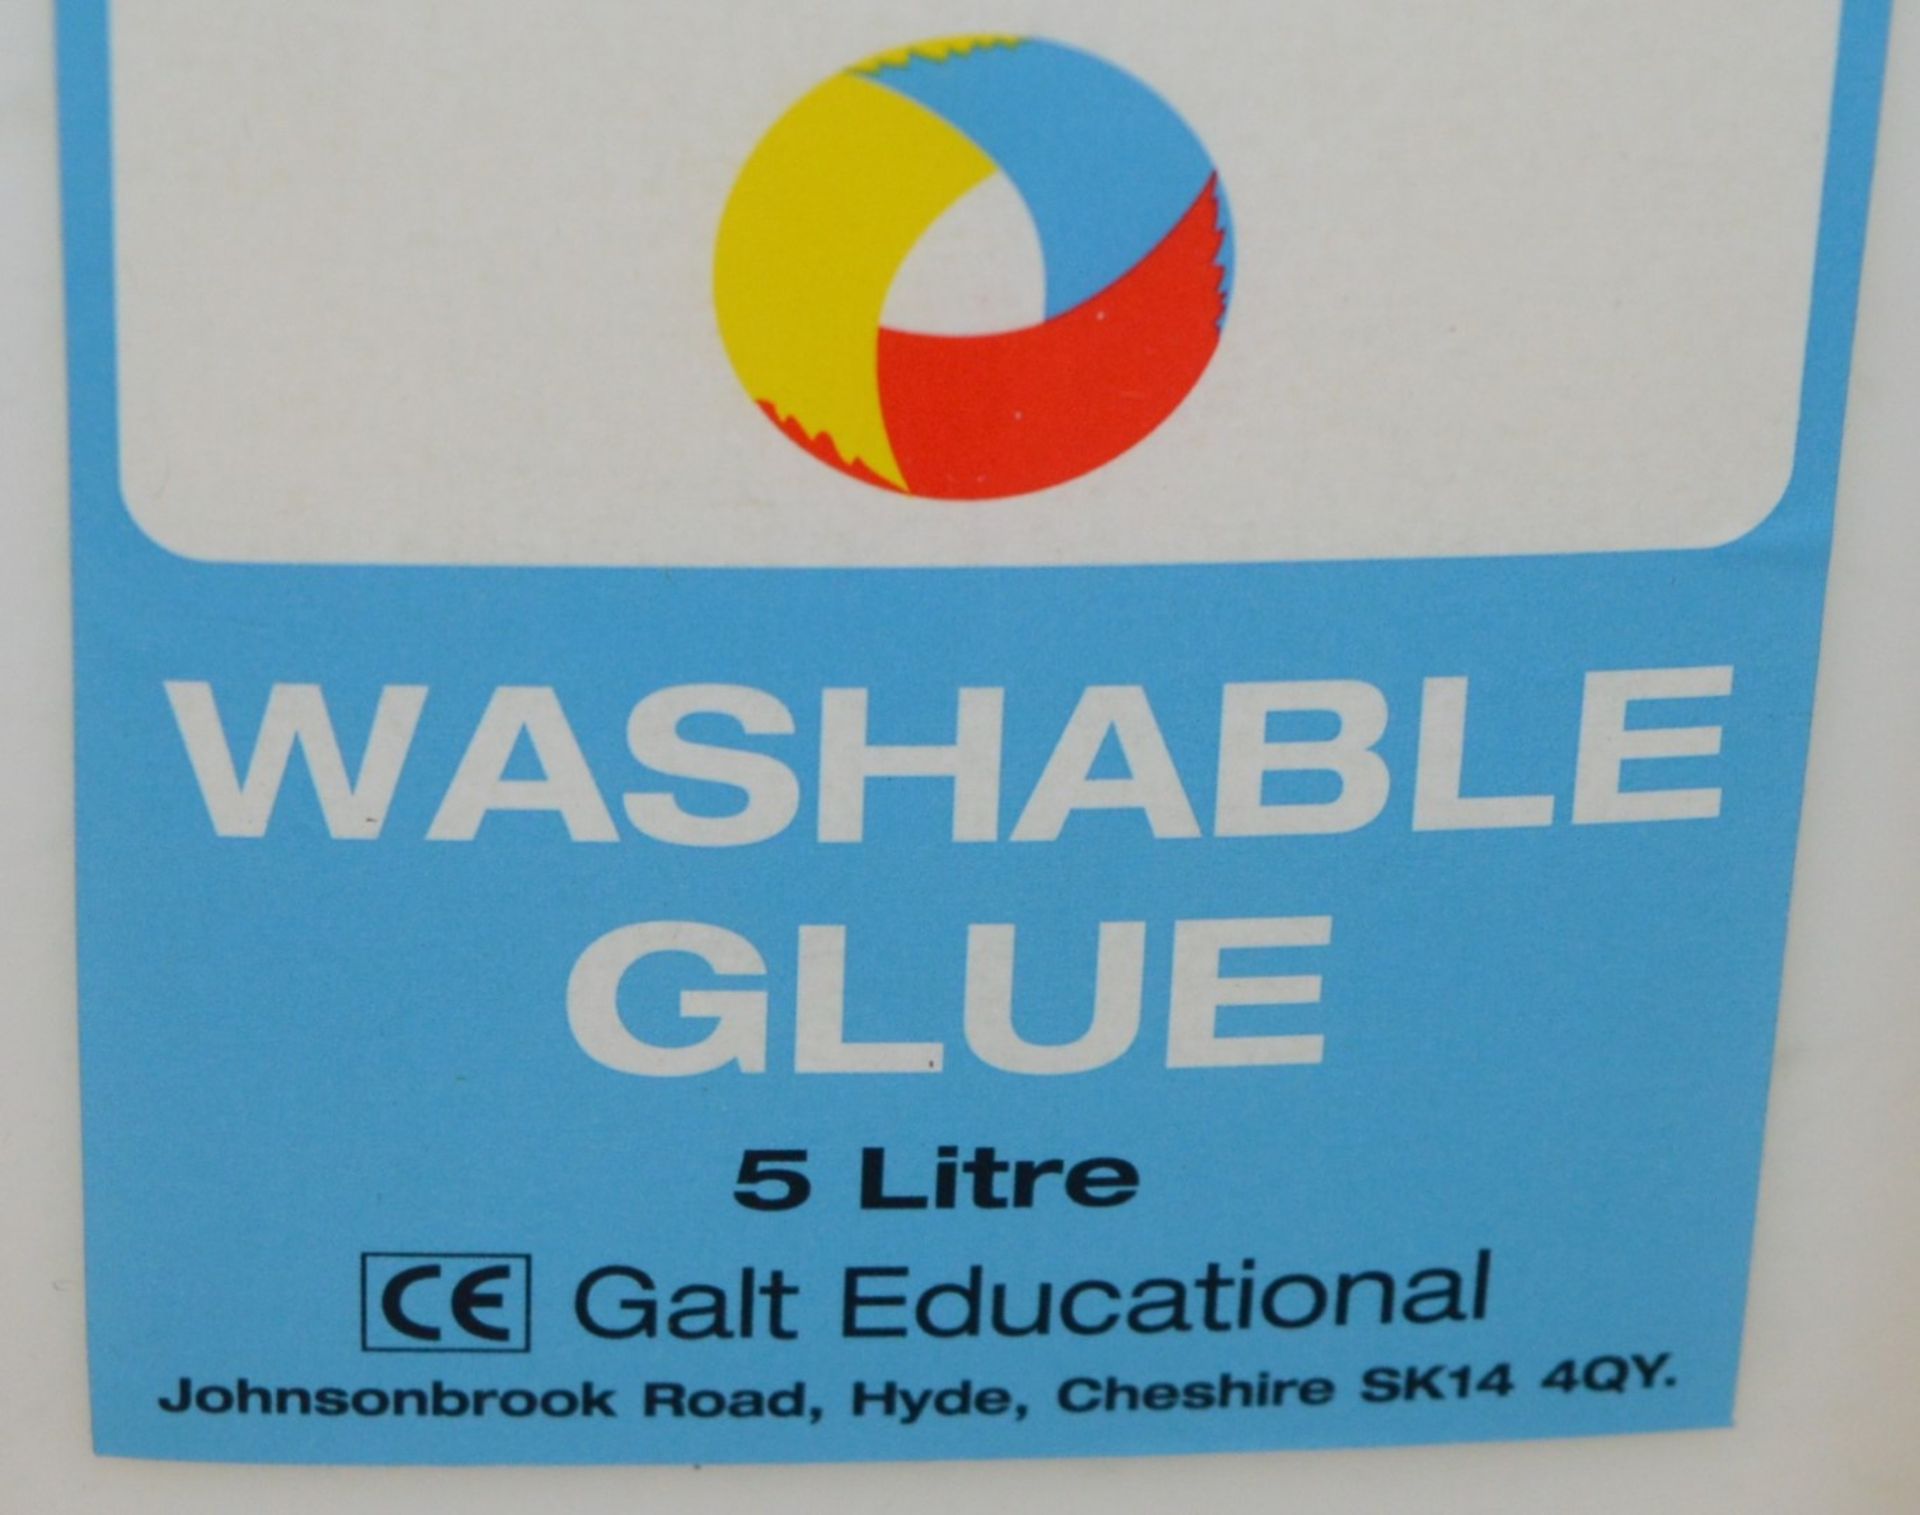 4 x Foundation Range Washable Glue - 5 Litre Containers - Brand New Stock - CL185 - Ref DRT0027 - - Image 4 of 4